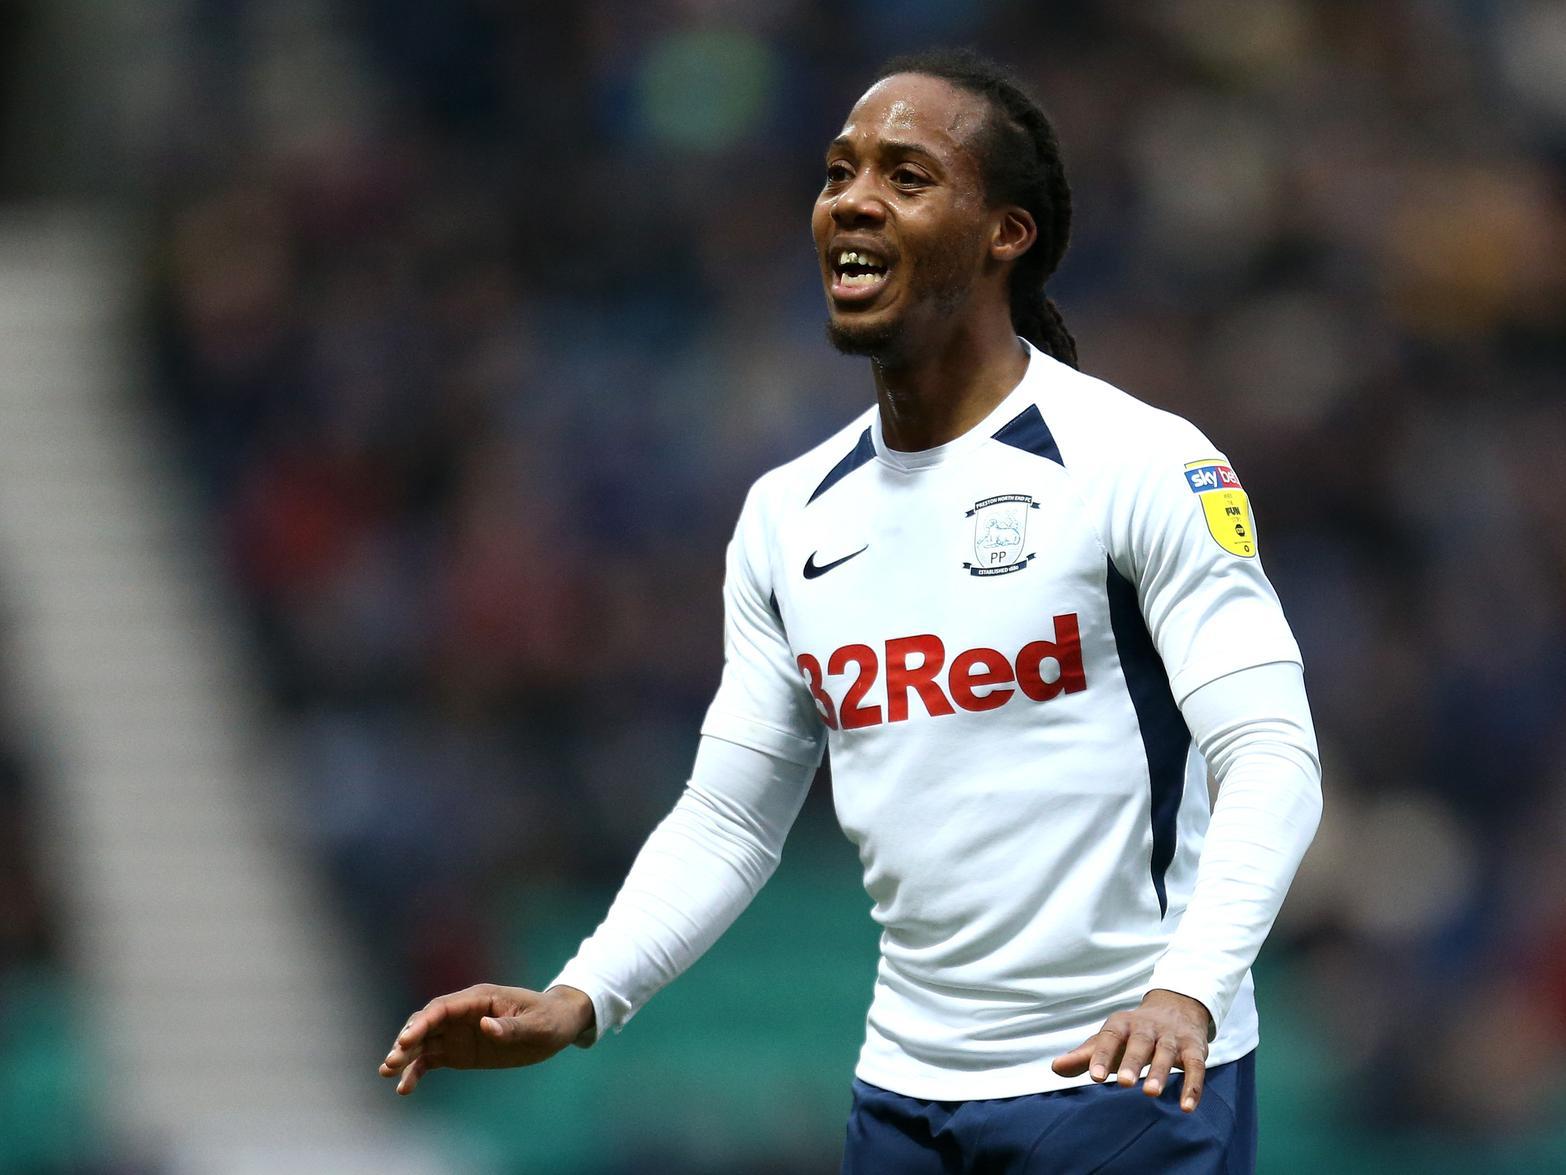 Preston North End man Daniel Johnson is glad to be back after an injury lay-off, but says his legs were in bits after the Charlton Athletic game. (Lancashire Post)